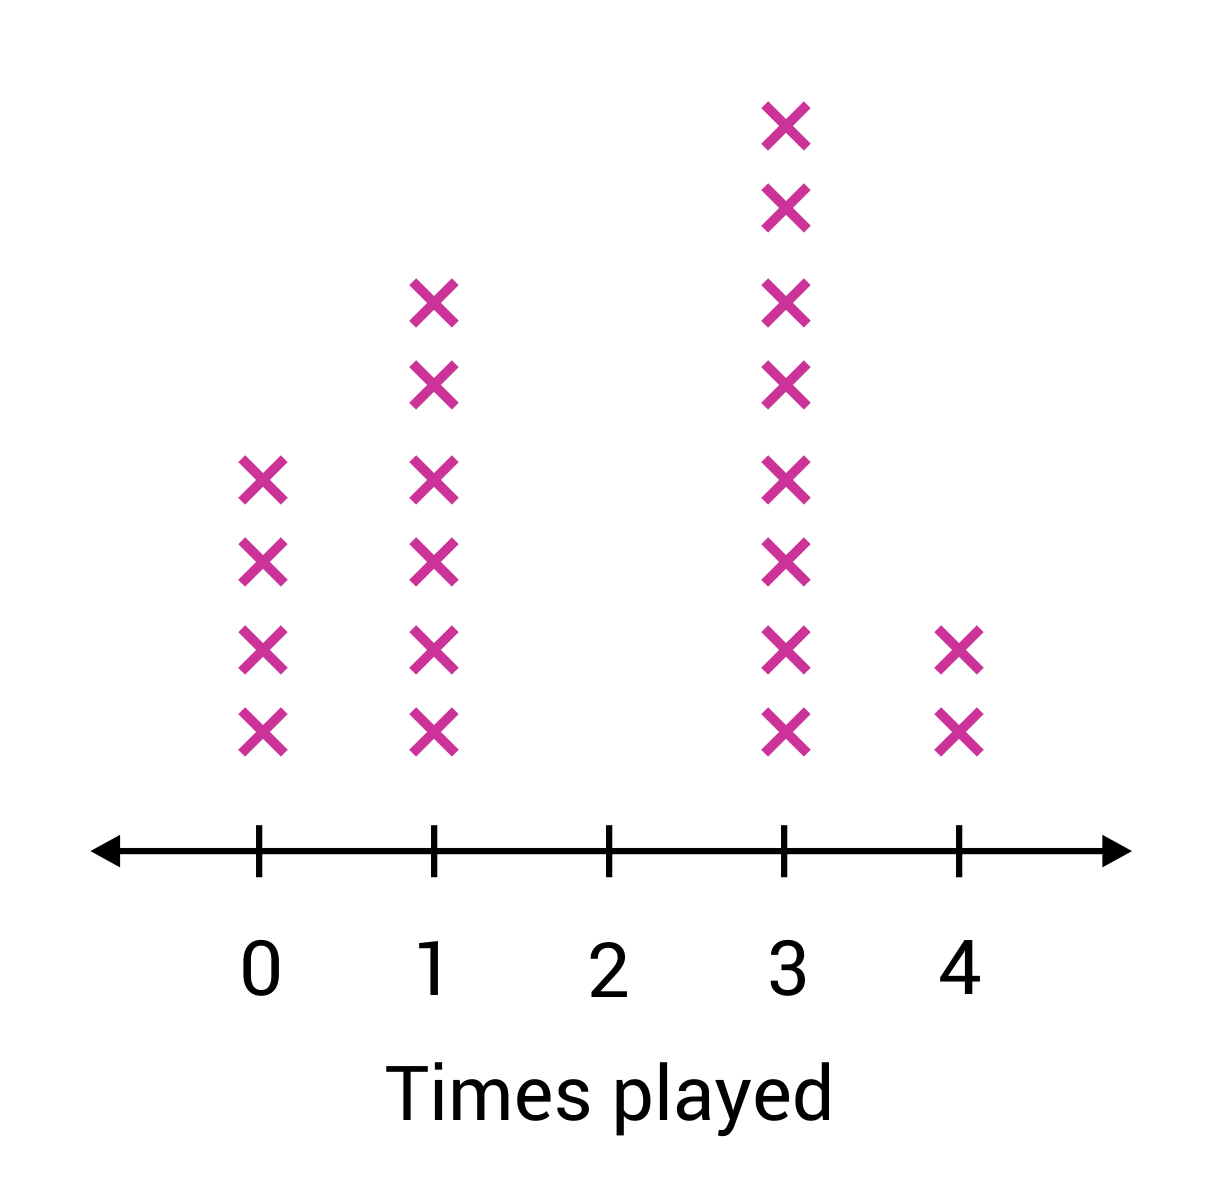 Line plot of how many times video games played per week